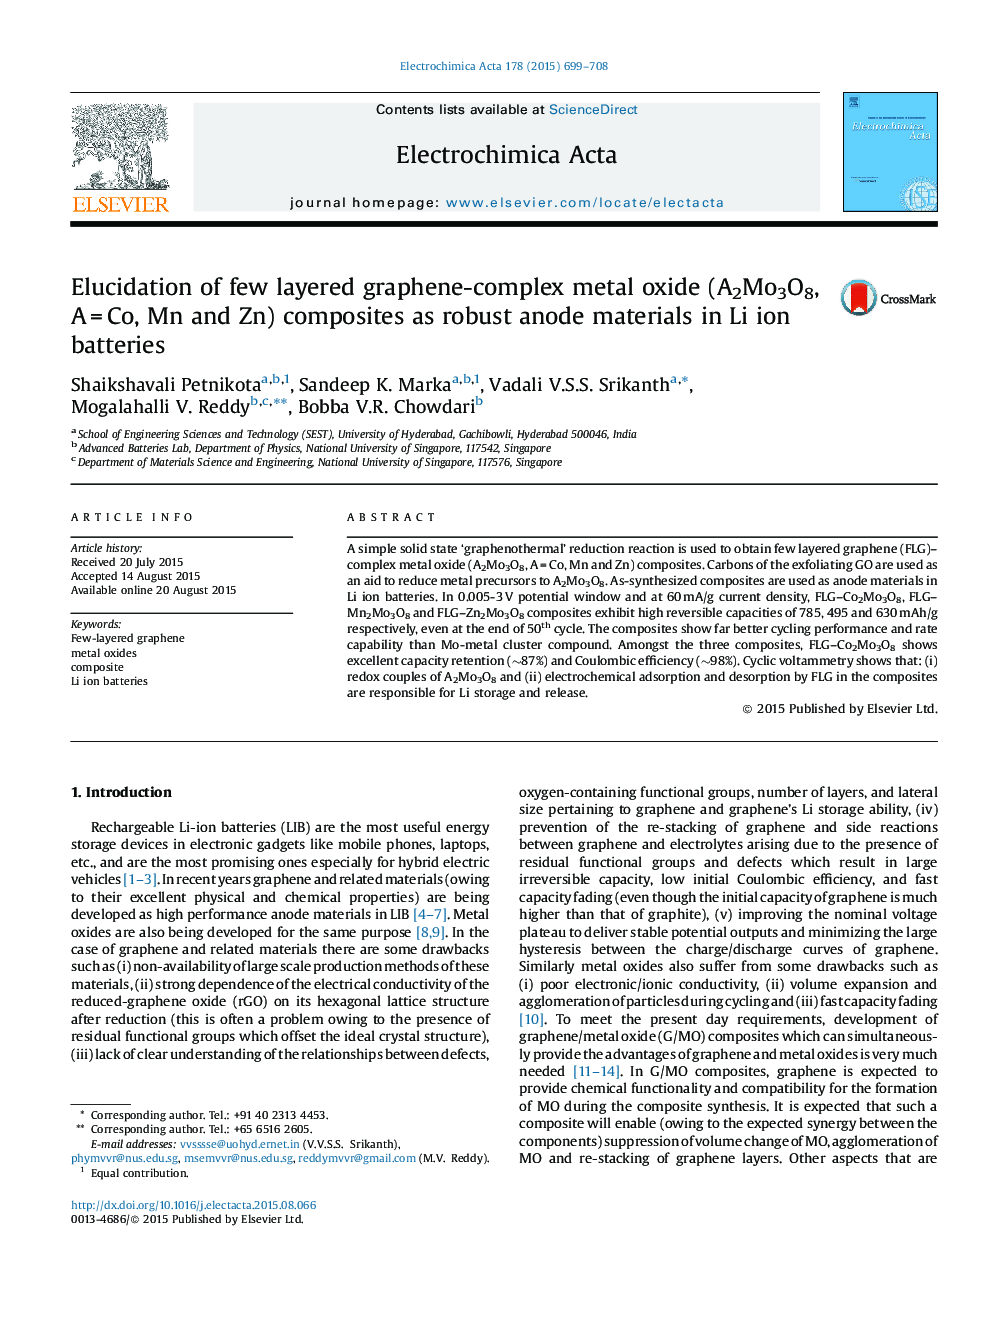 Elucidation of few layered graphene-complex metal oxide (A2Mo3O8, A = Co, Mn and Zn) composites as robust anode materials in Li ion batteries